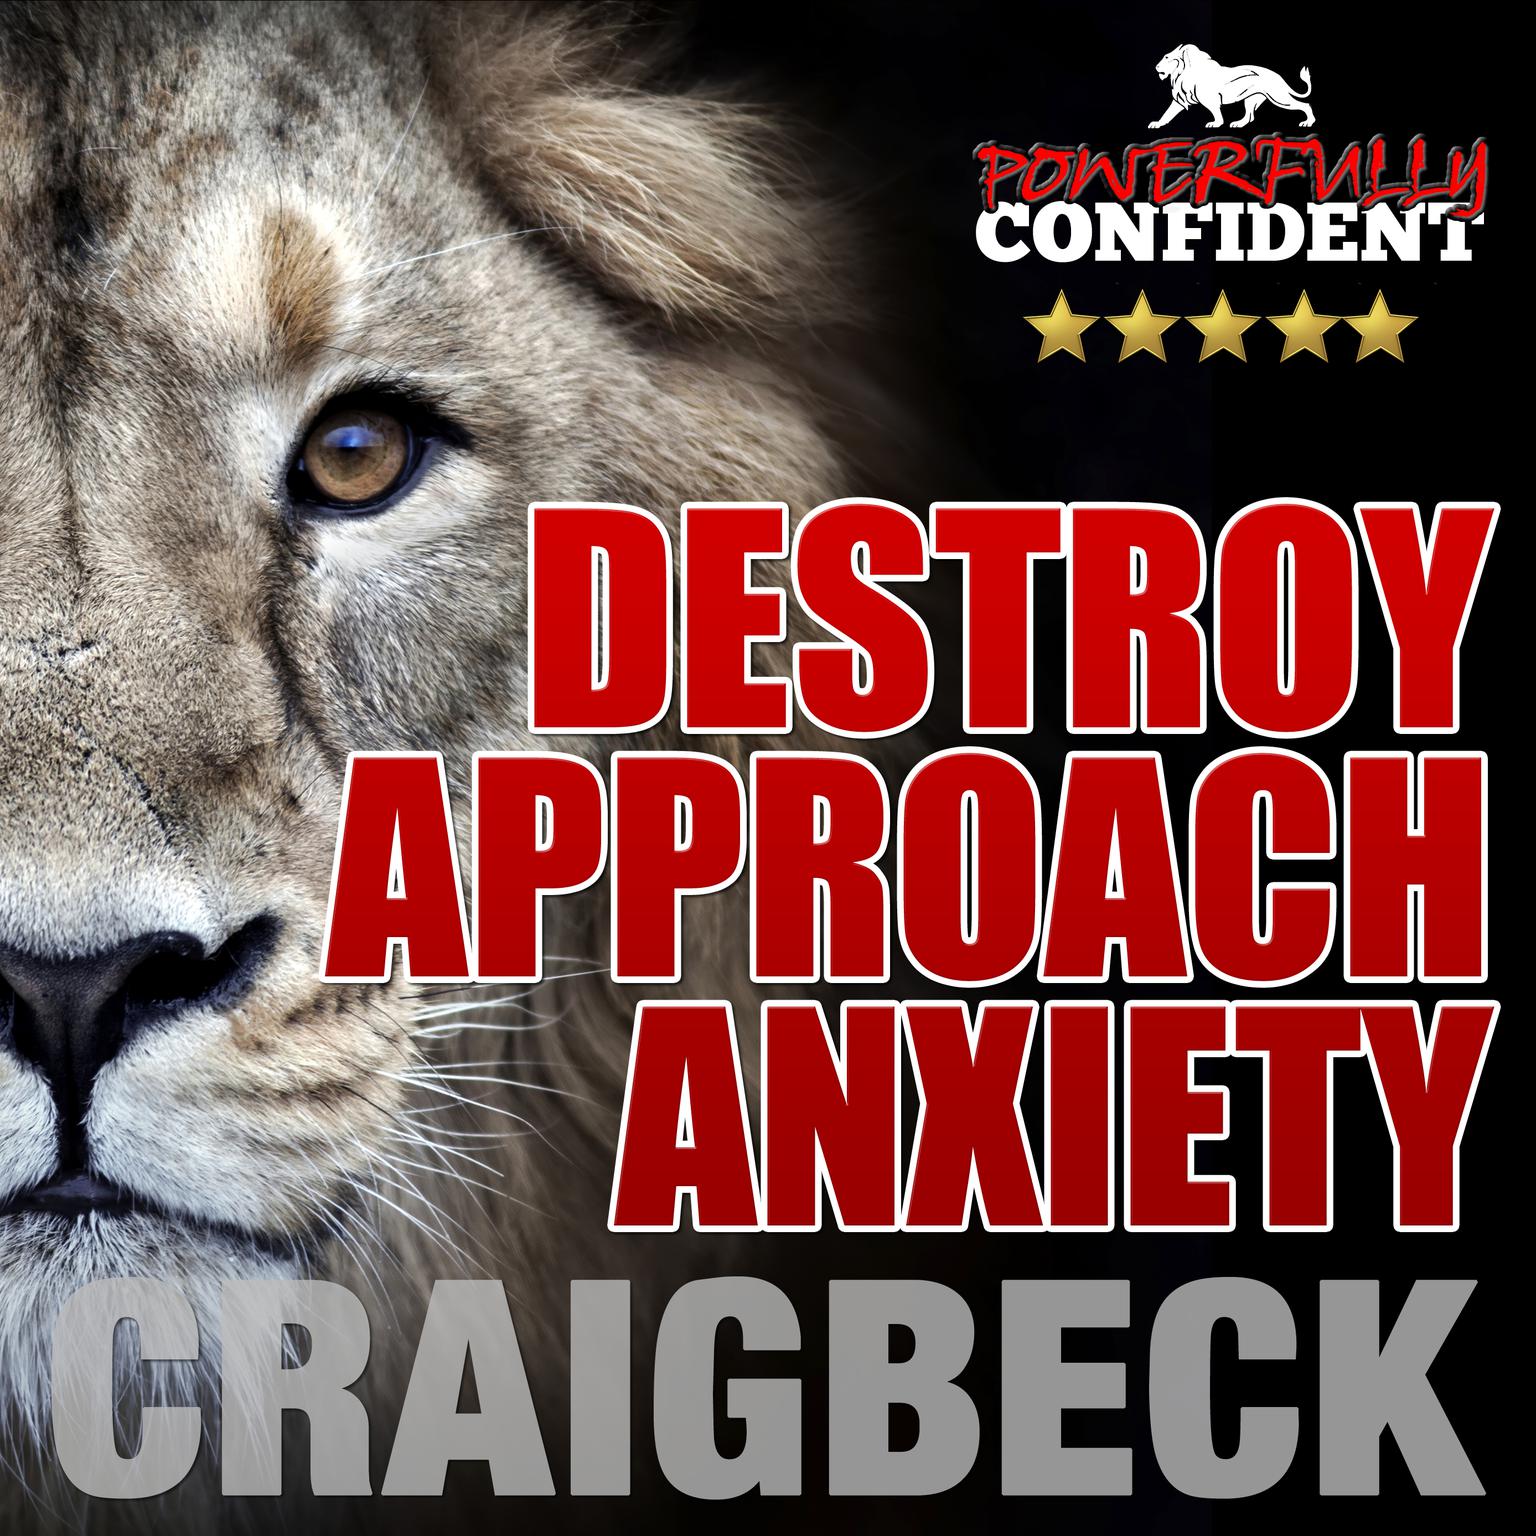 Destroy Approach Anxiety: Being Fearlessly Confident with Women Audiobook, by Craig Beck